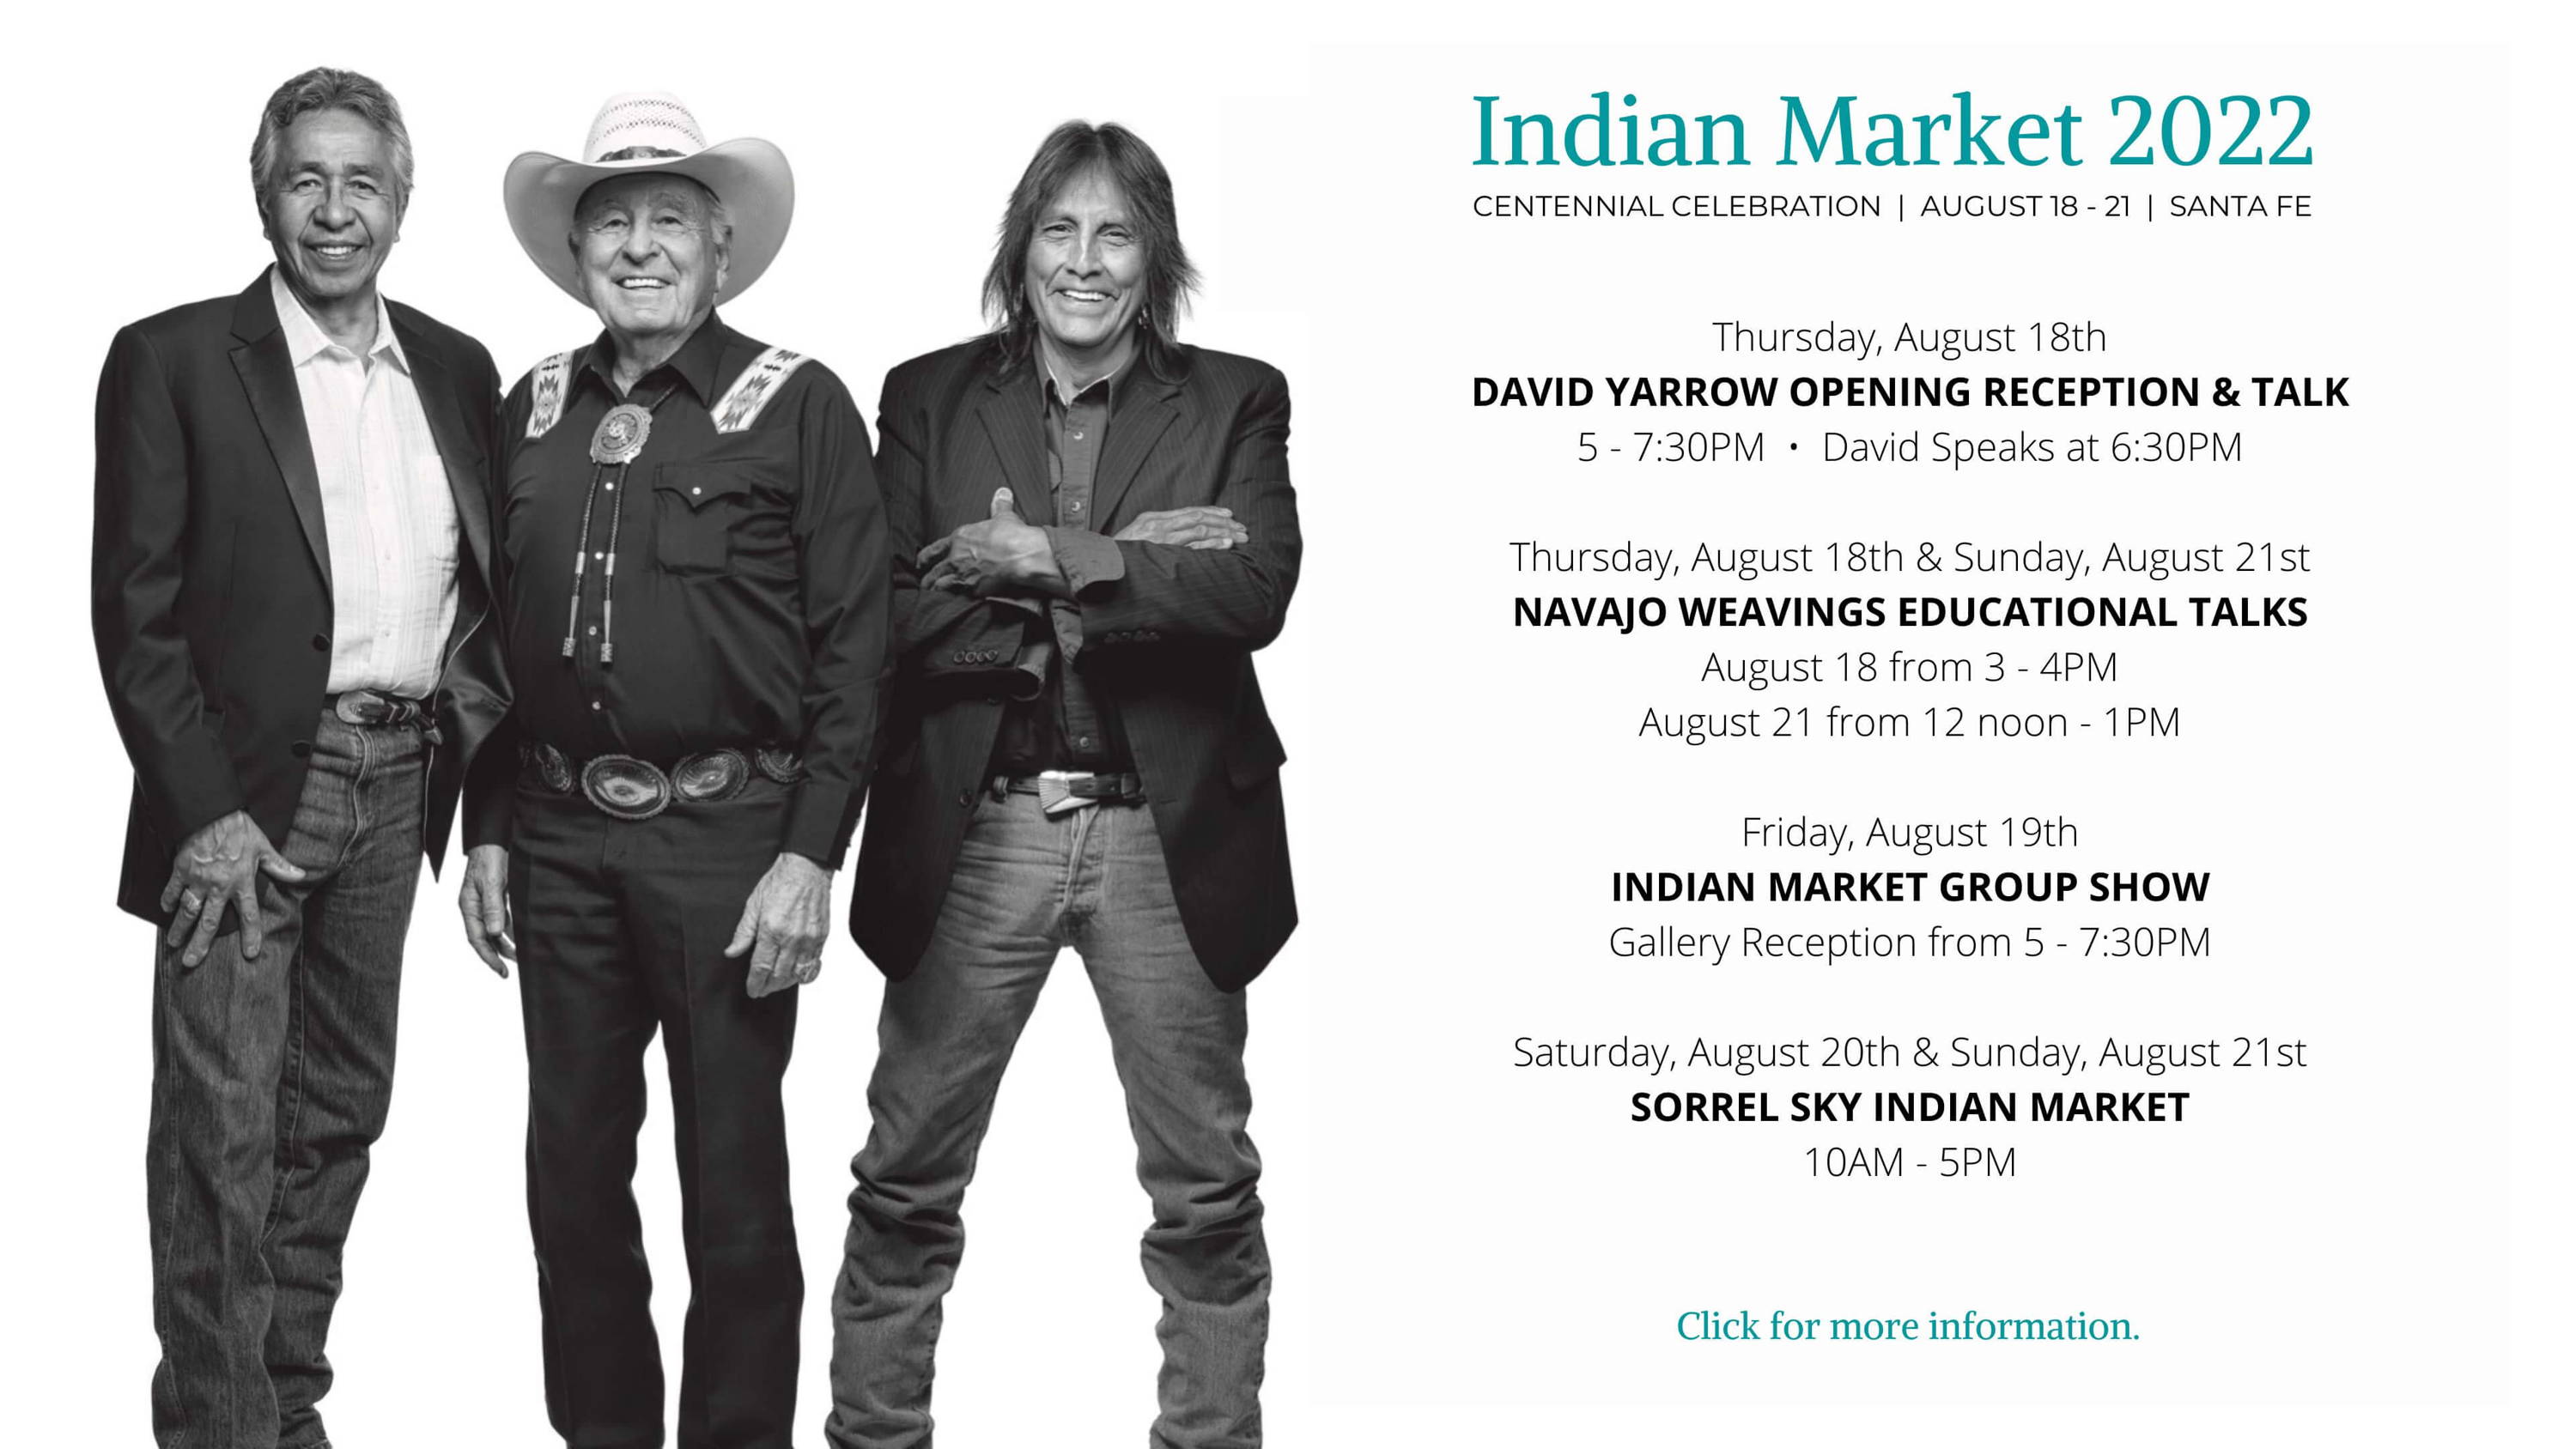 Kevin Red Star. Ben Nighthorse. Ray Tracey. Santa Fe Indian Market. Sorrel Sky Gallery